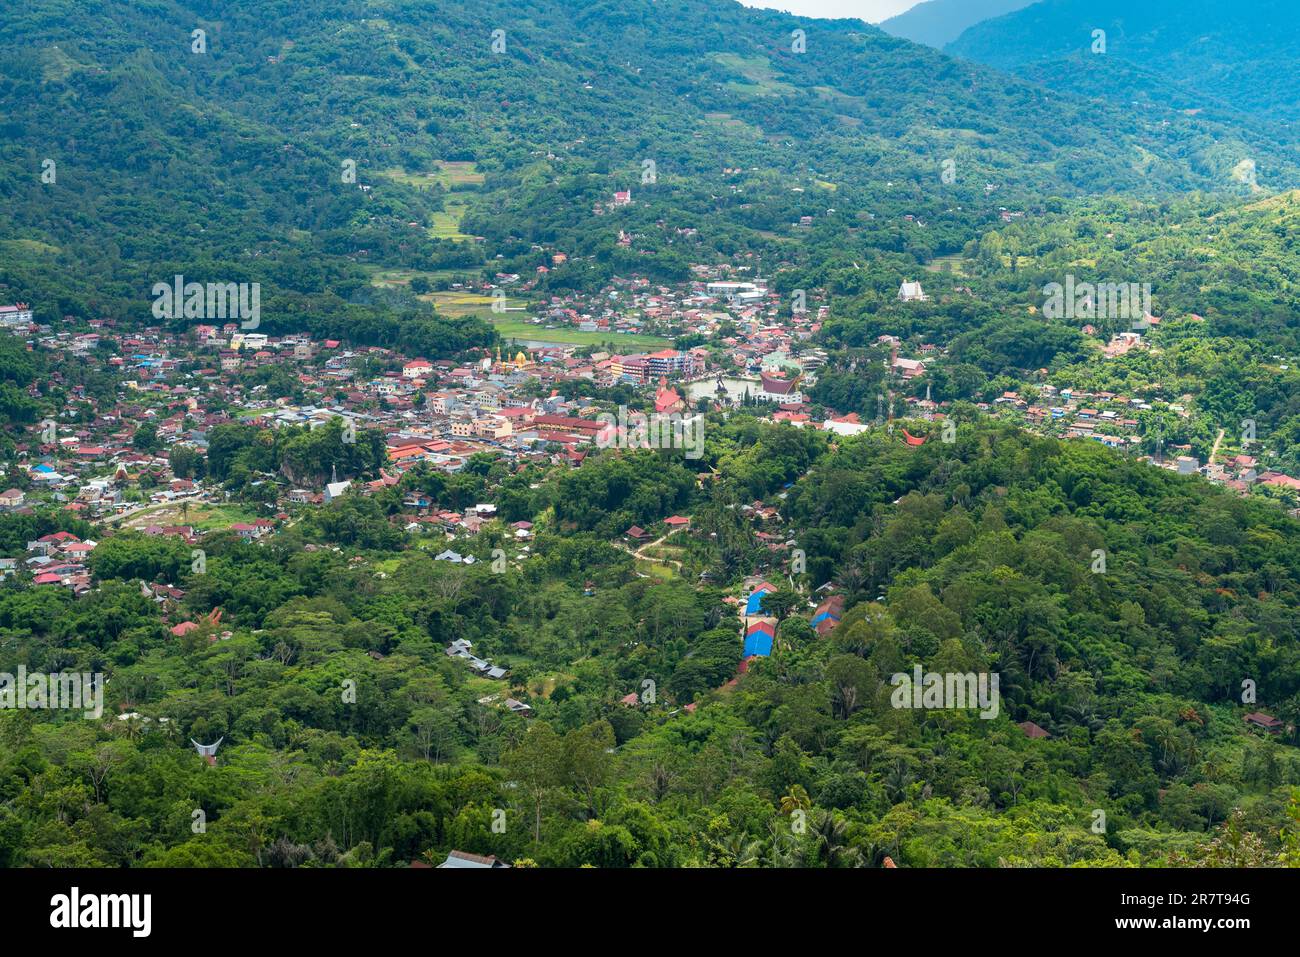 Makale is the capital of the province of Tana Toraja on Sulawesi. The city has about 30, 000 inhabitants. Makale is not an old town. It was laid out Stock Photo